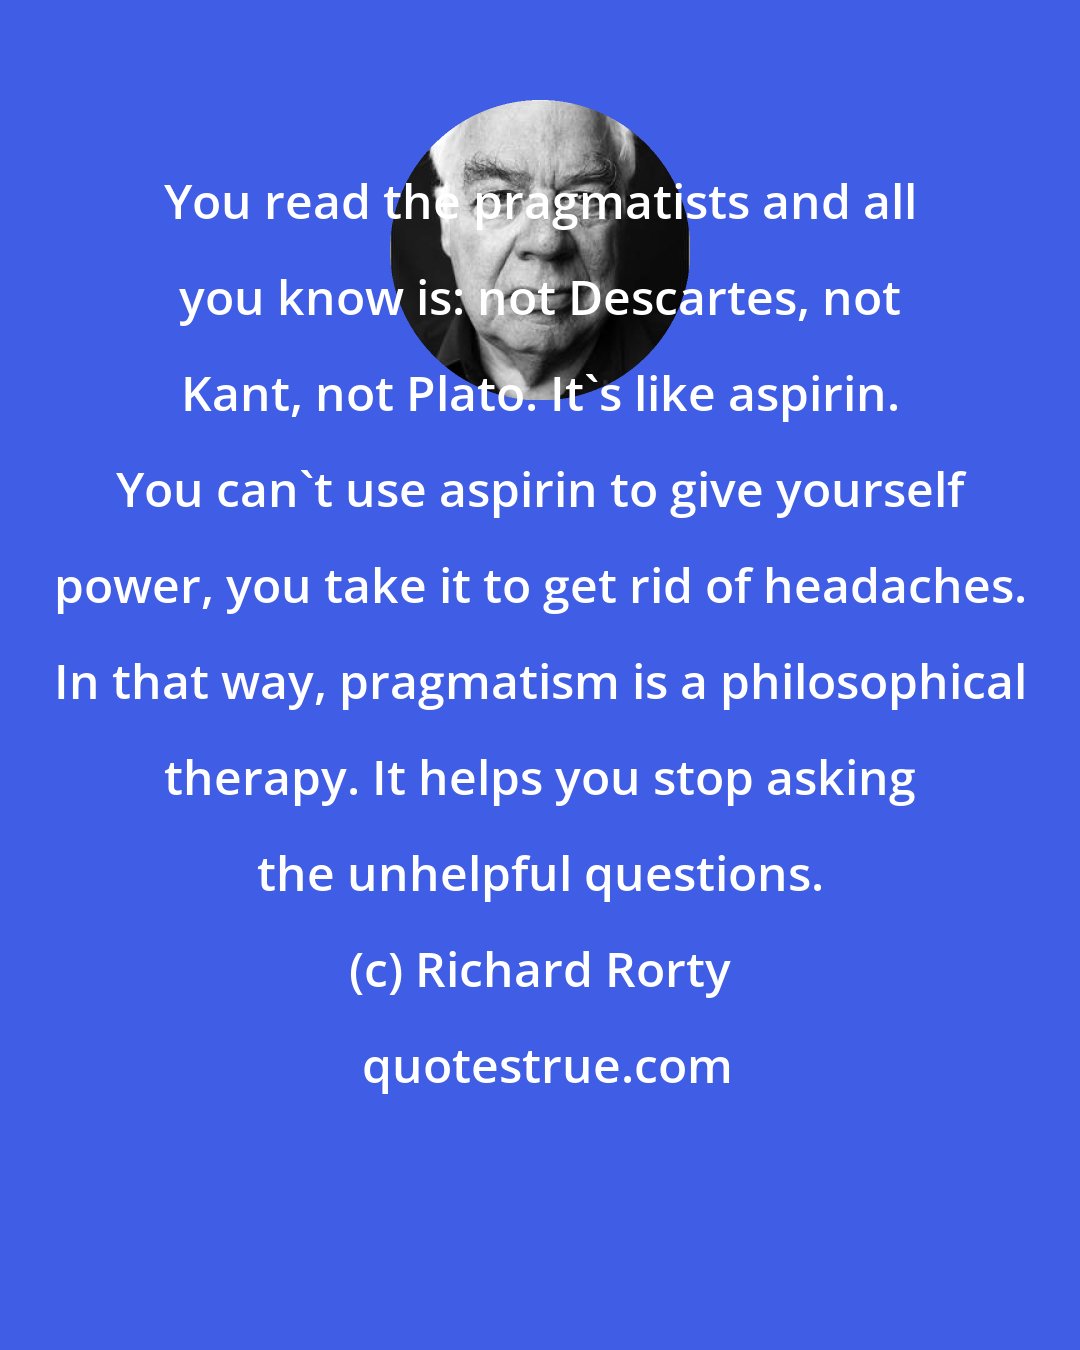 Richard Rorty: You read the pragmatists and all you know is: not Descartes, not Kant, not Plato. It's like aspirin. You can't use aspirin to give yourself power, you take it to get rid of headaches. In that way, pragmatism is a philosophical therapy. It helps you stop asking the unhelpful questions.